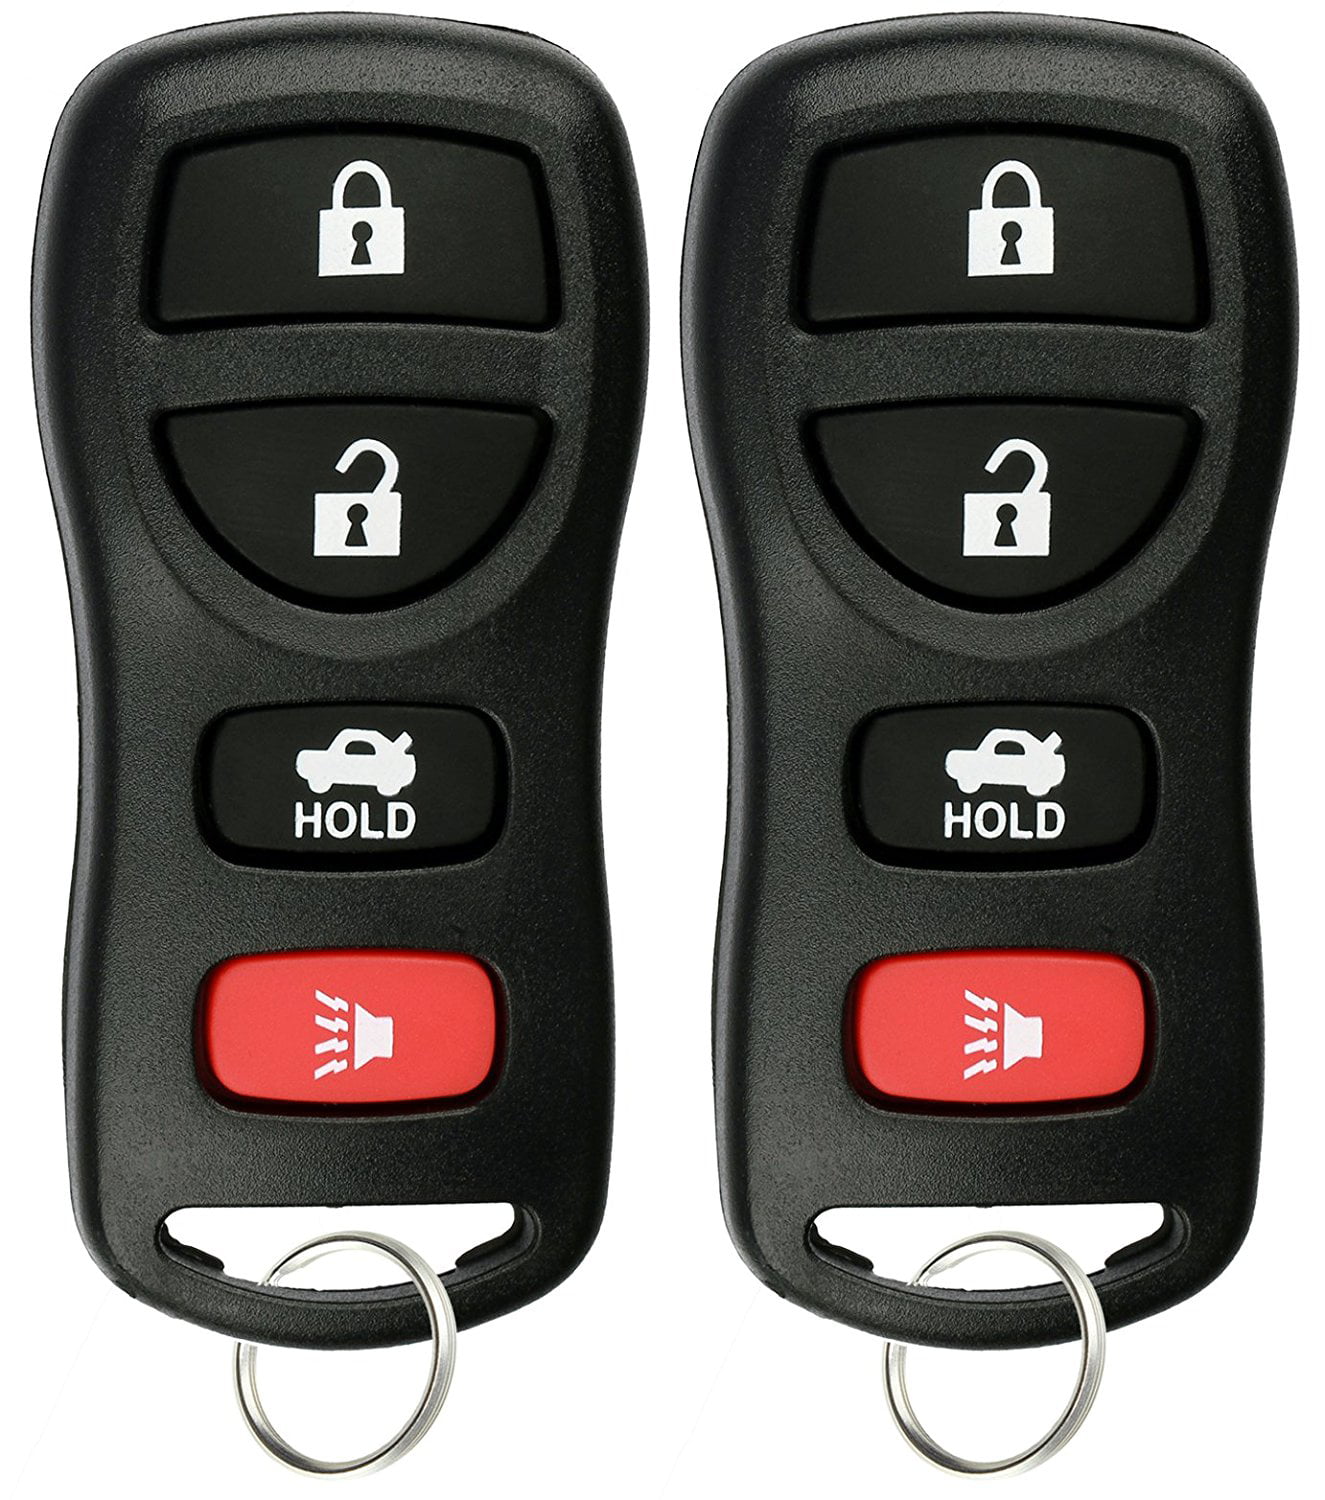 2 Replacement Remote Key Fob Keyless Entry Ignition Fit 2011-2013 Nissan JUKE 